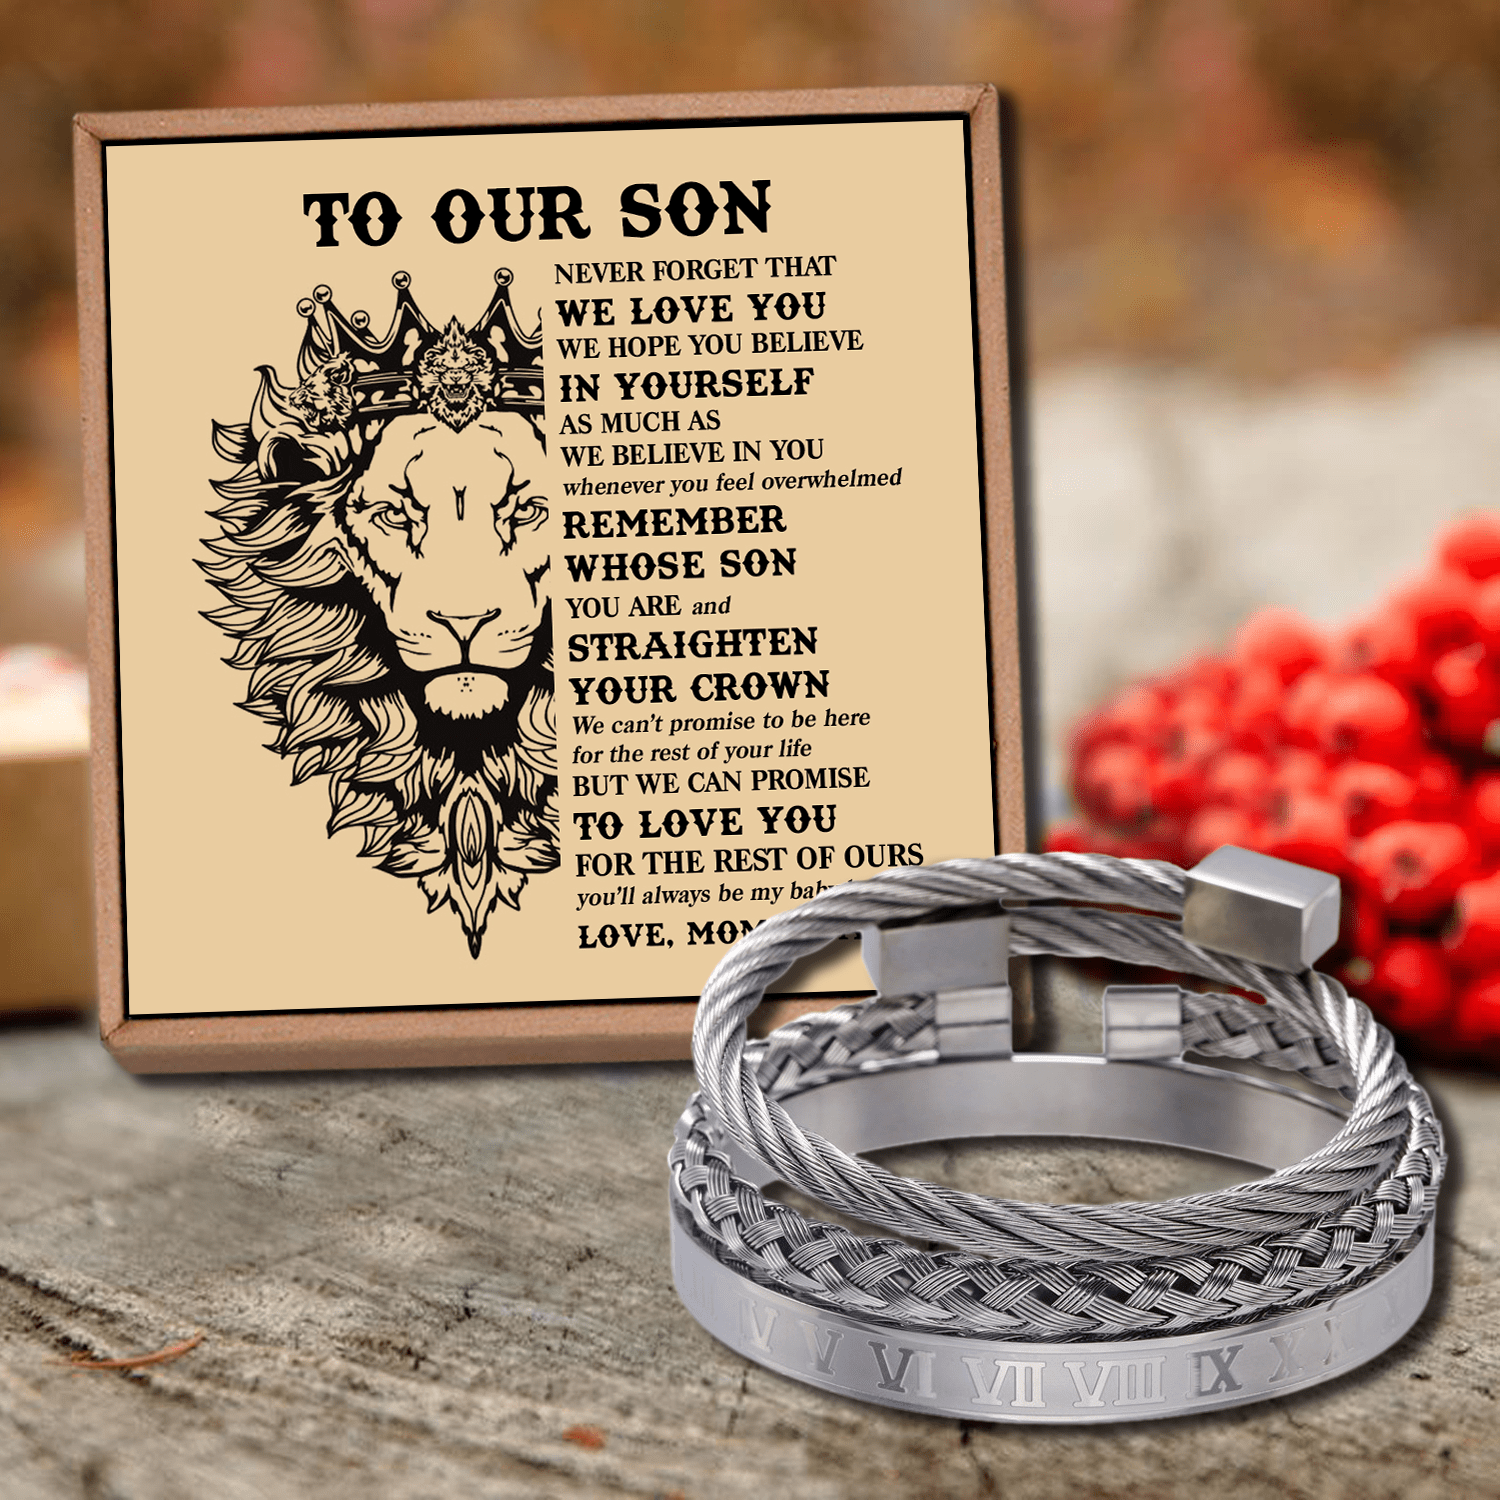 Bracelets To Our Son - Believe In Yourself Roman Numeral Bracelet Set Silver GiveMe-Gifts